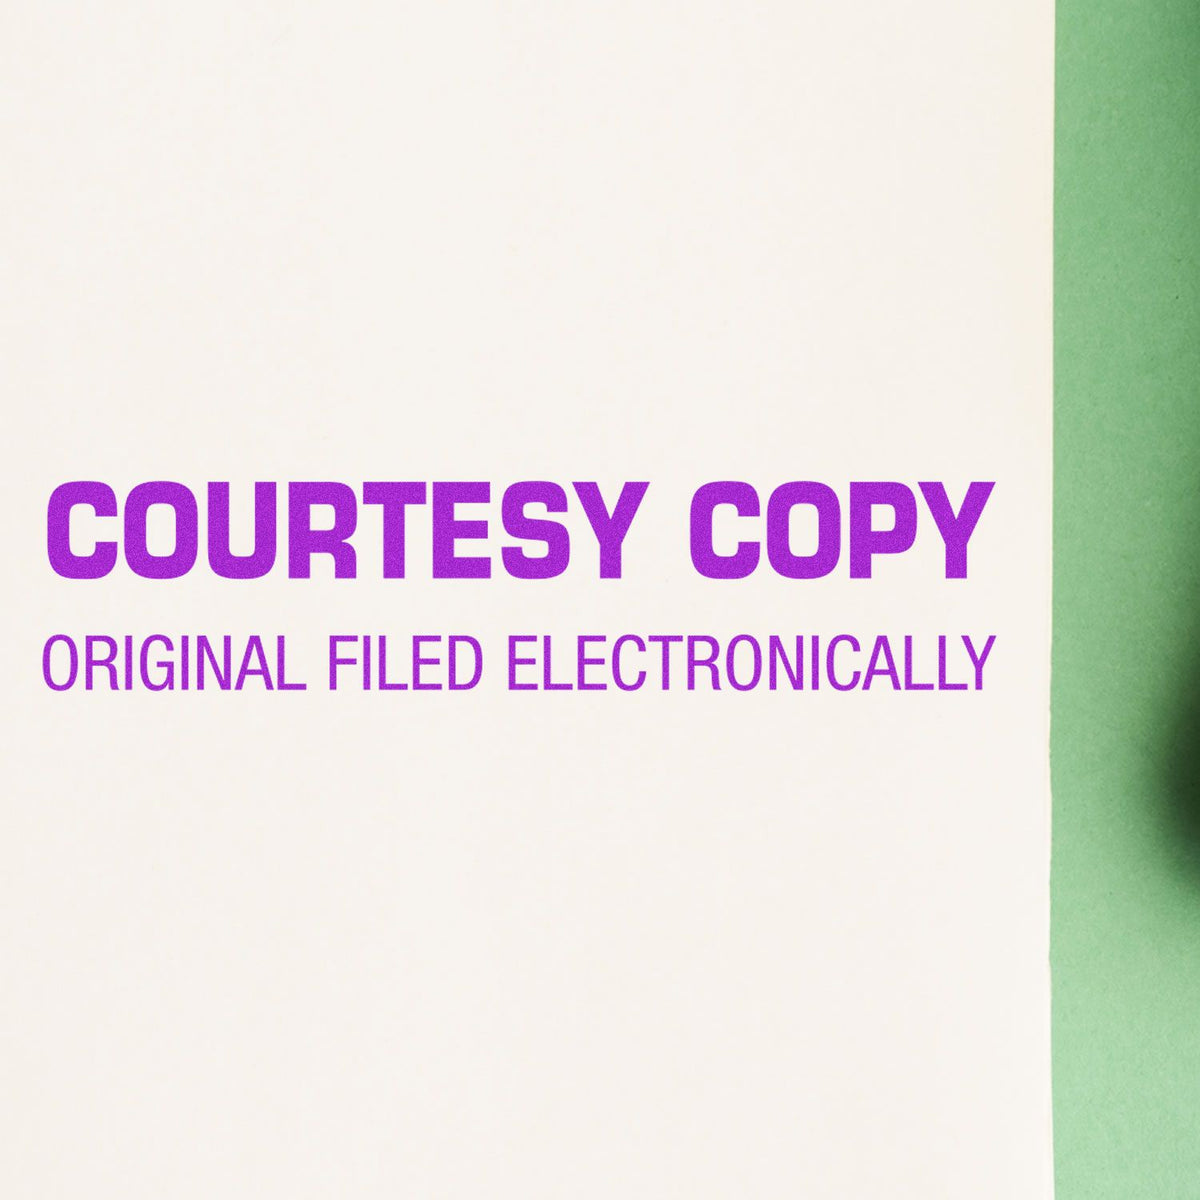 Courtesy Copy Original Filed Electronically Rubber Stamp In Use